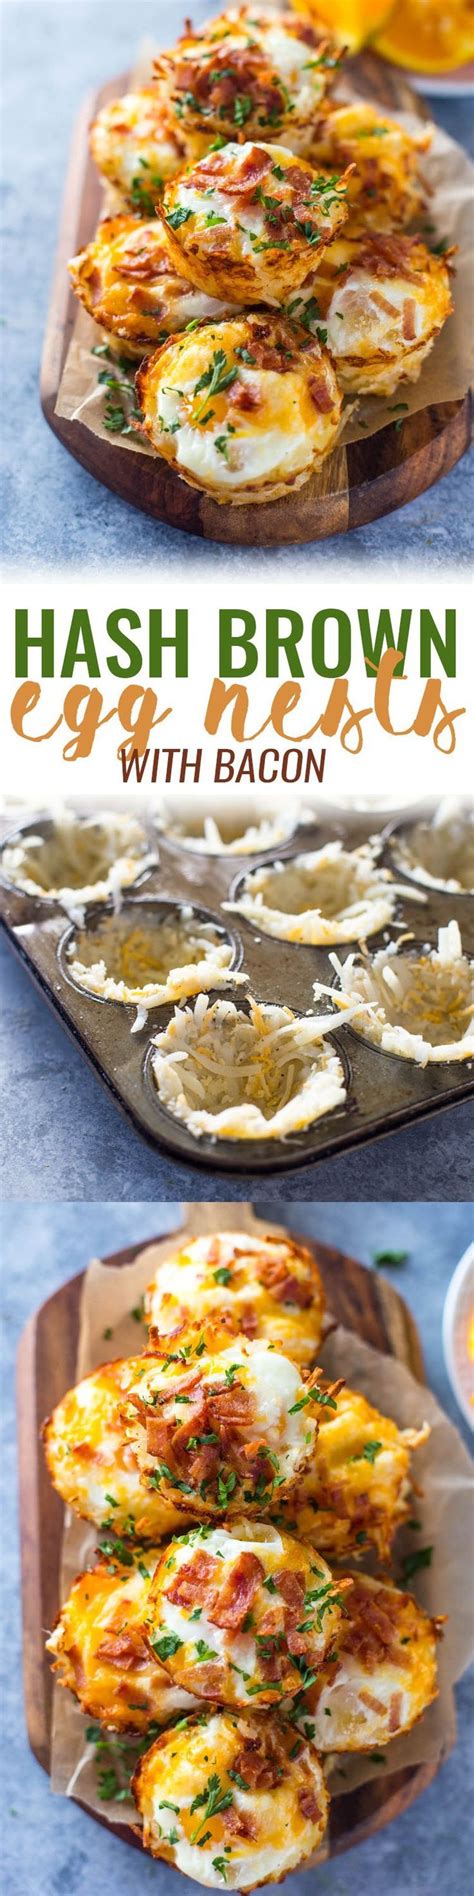 Grate baked potatoes into a large bowl. Hash Brown Egg Nests | Advocare recipes, Cooking recipes ...